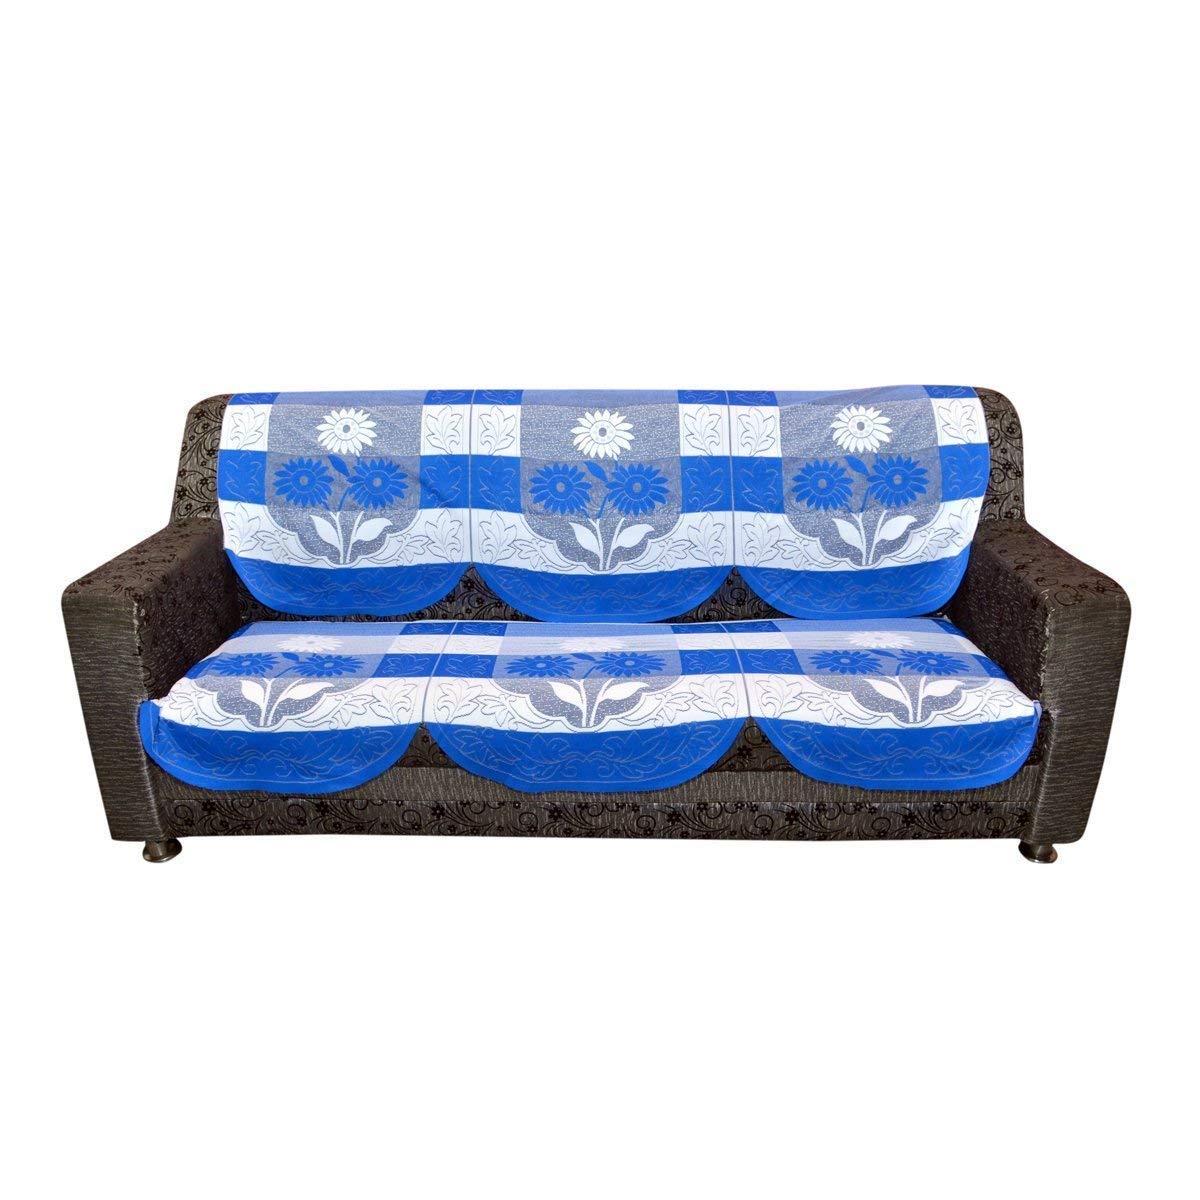 Kuber Industries Flower Cotton 7 Piece 5 Seater Sofa Cover with Center Table Cover (Blue) - CTKTC22284